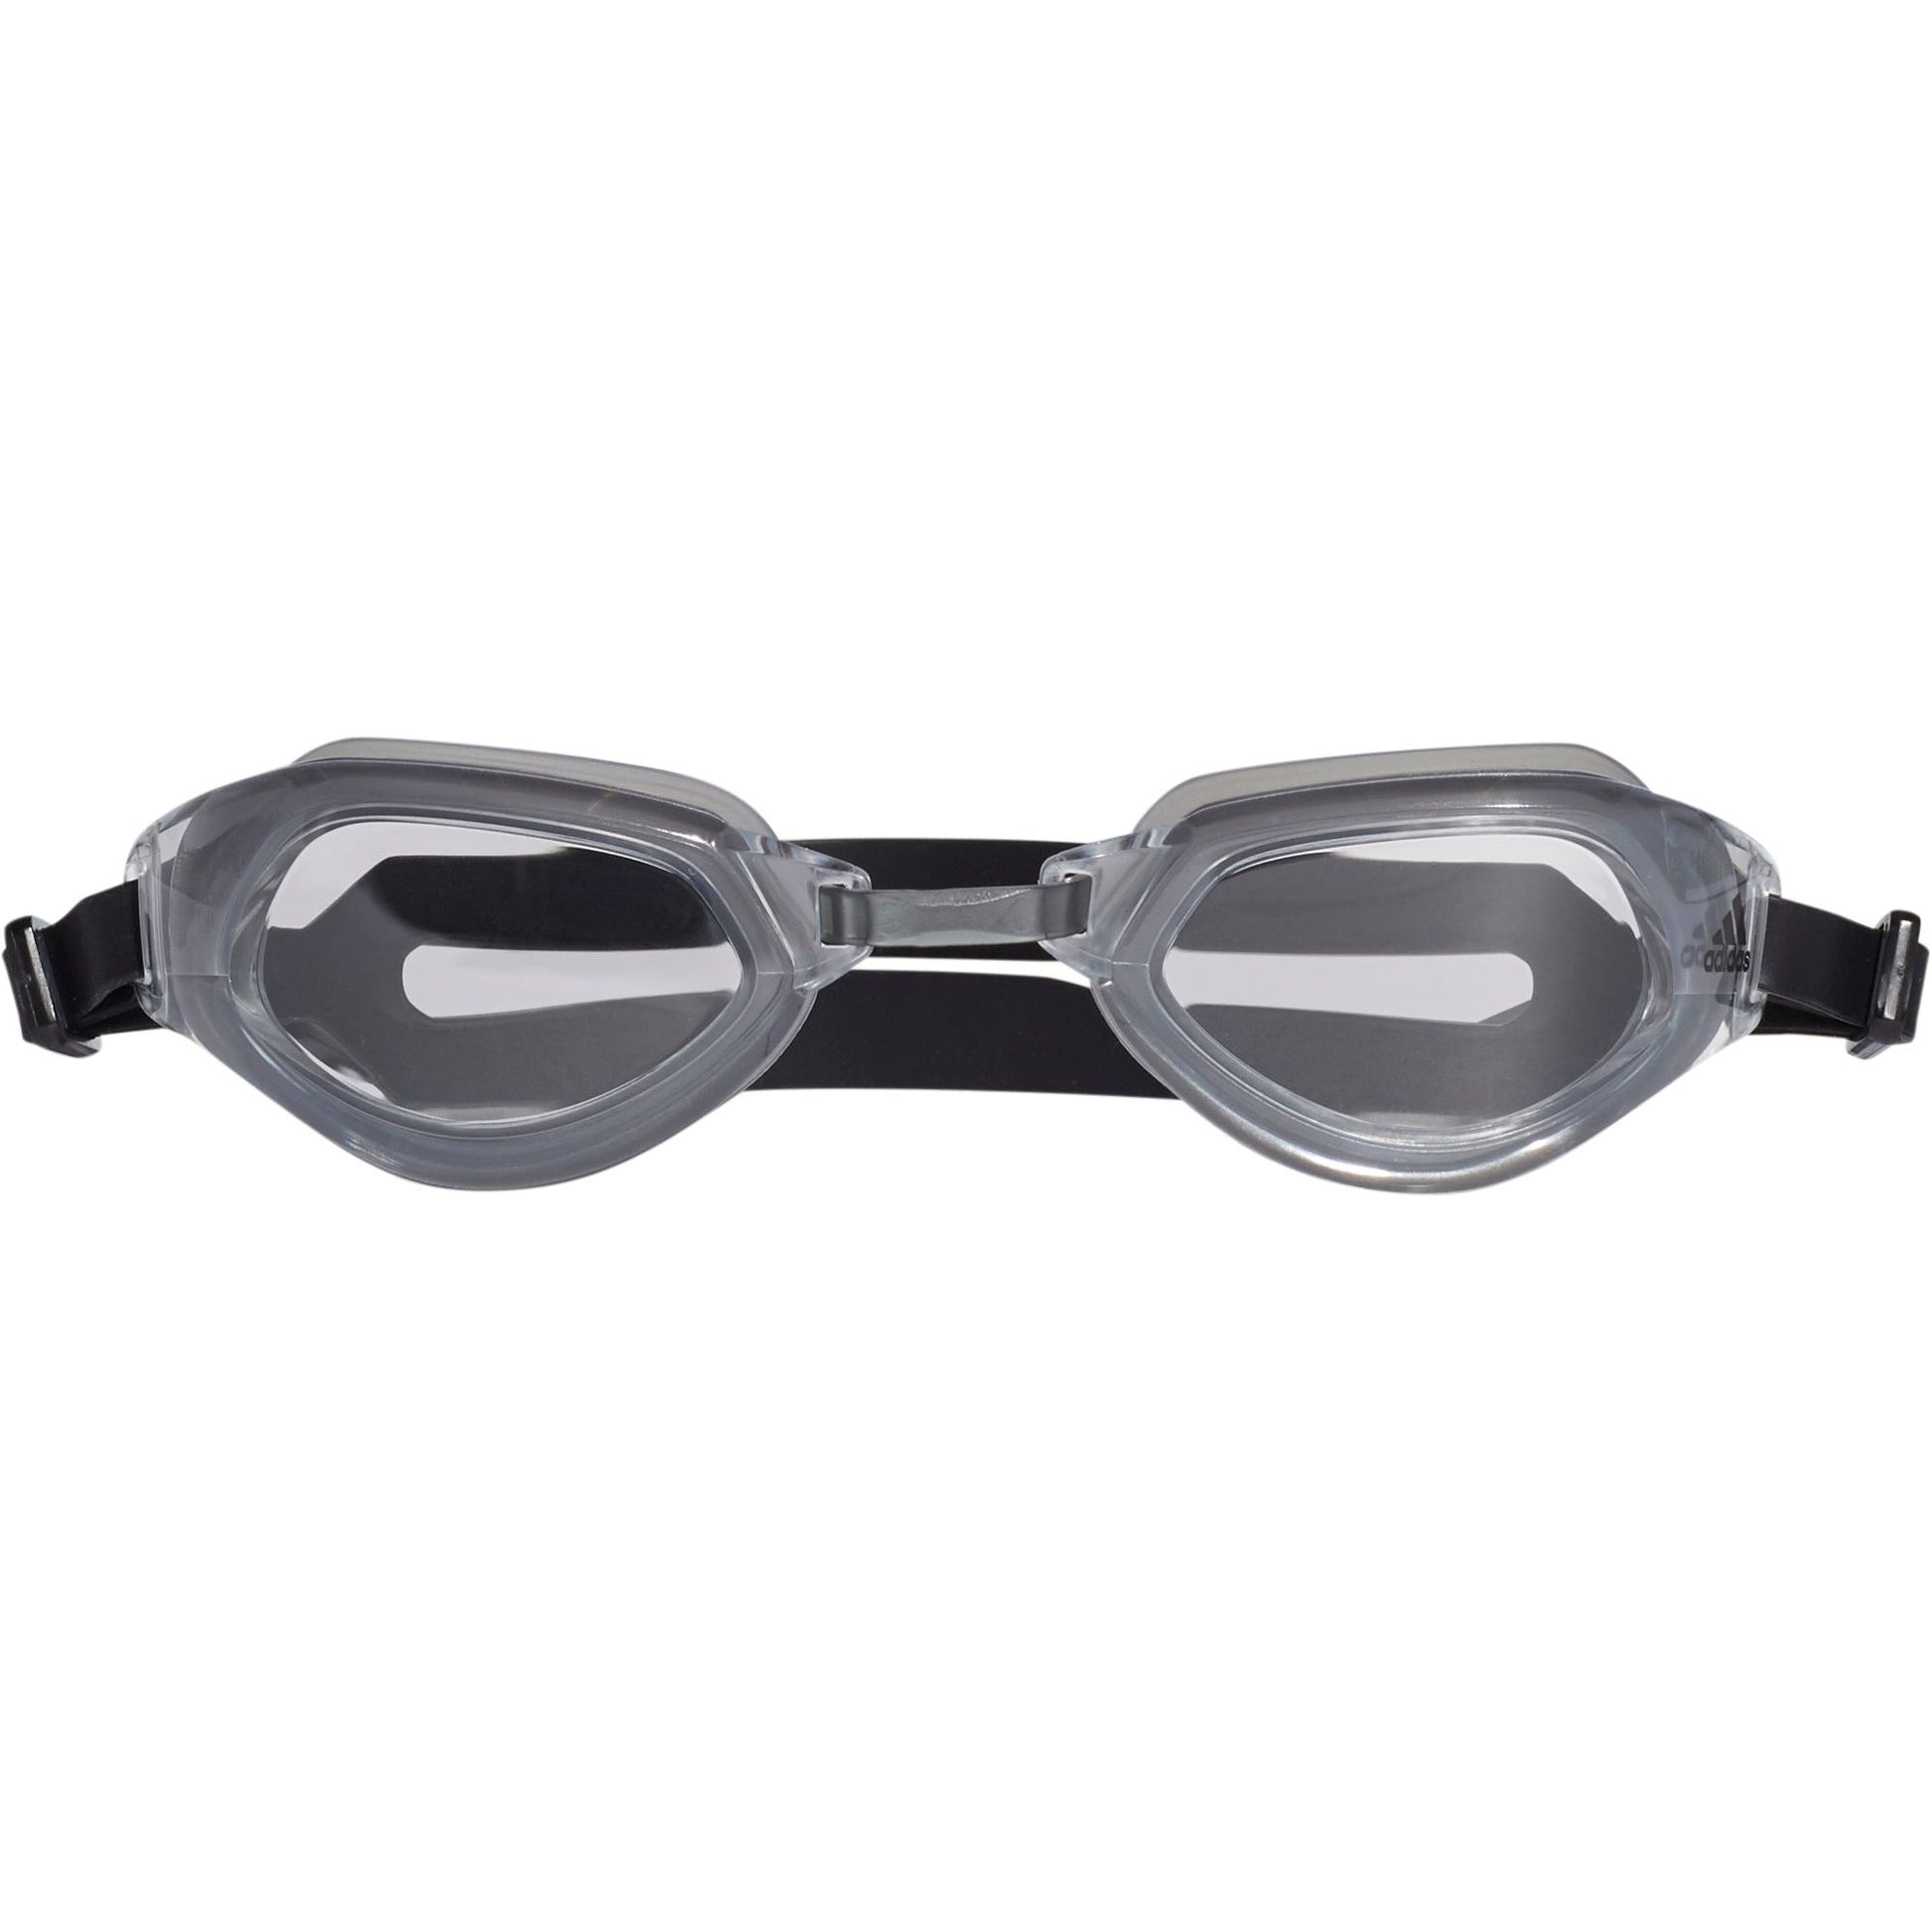 Adidas Persistar Fit Swimming Goggles Br1065 Front - Front View